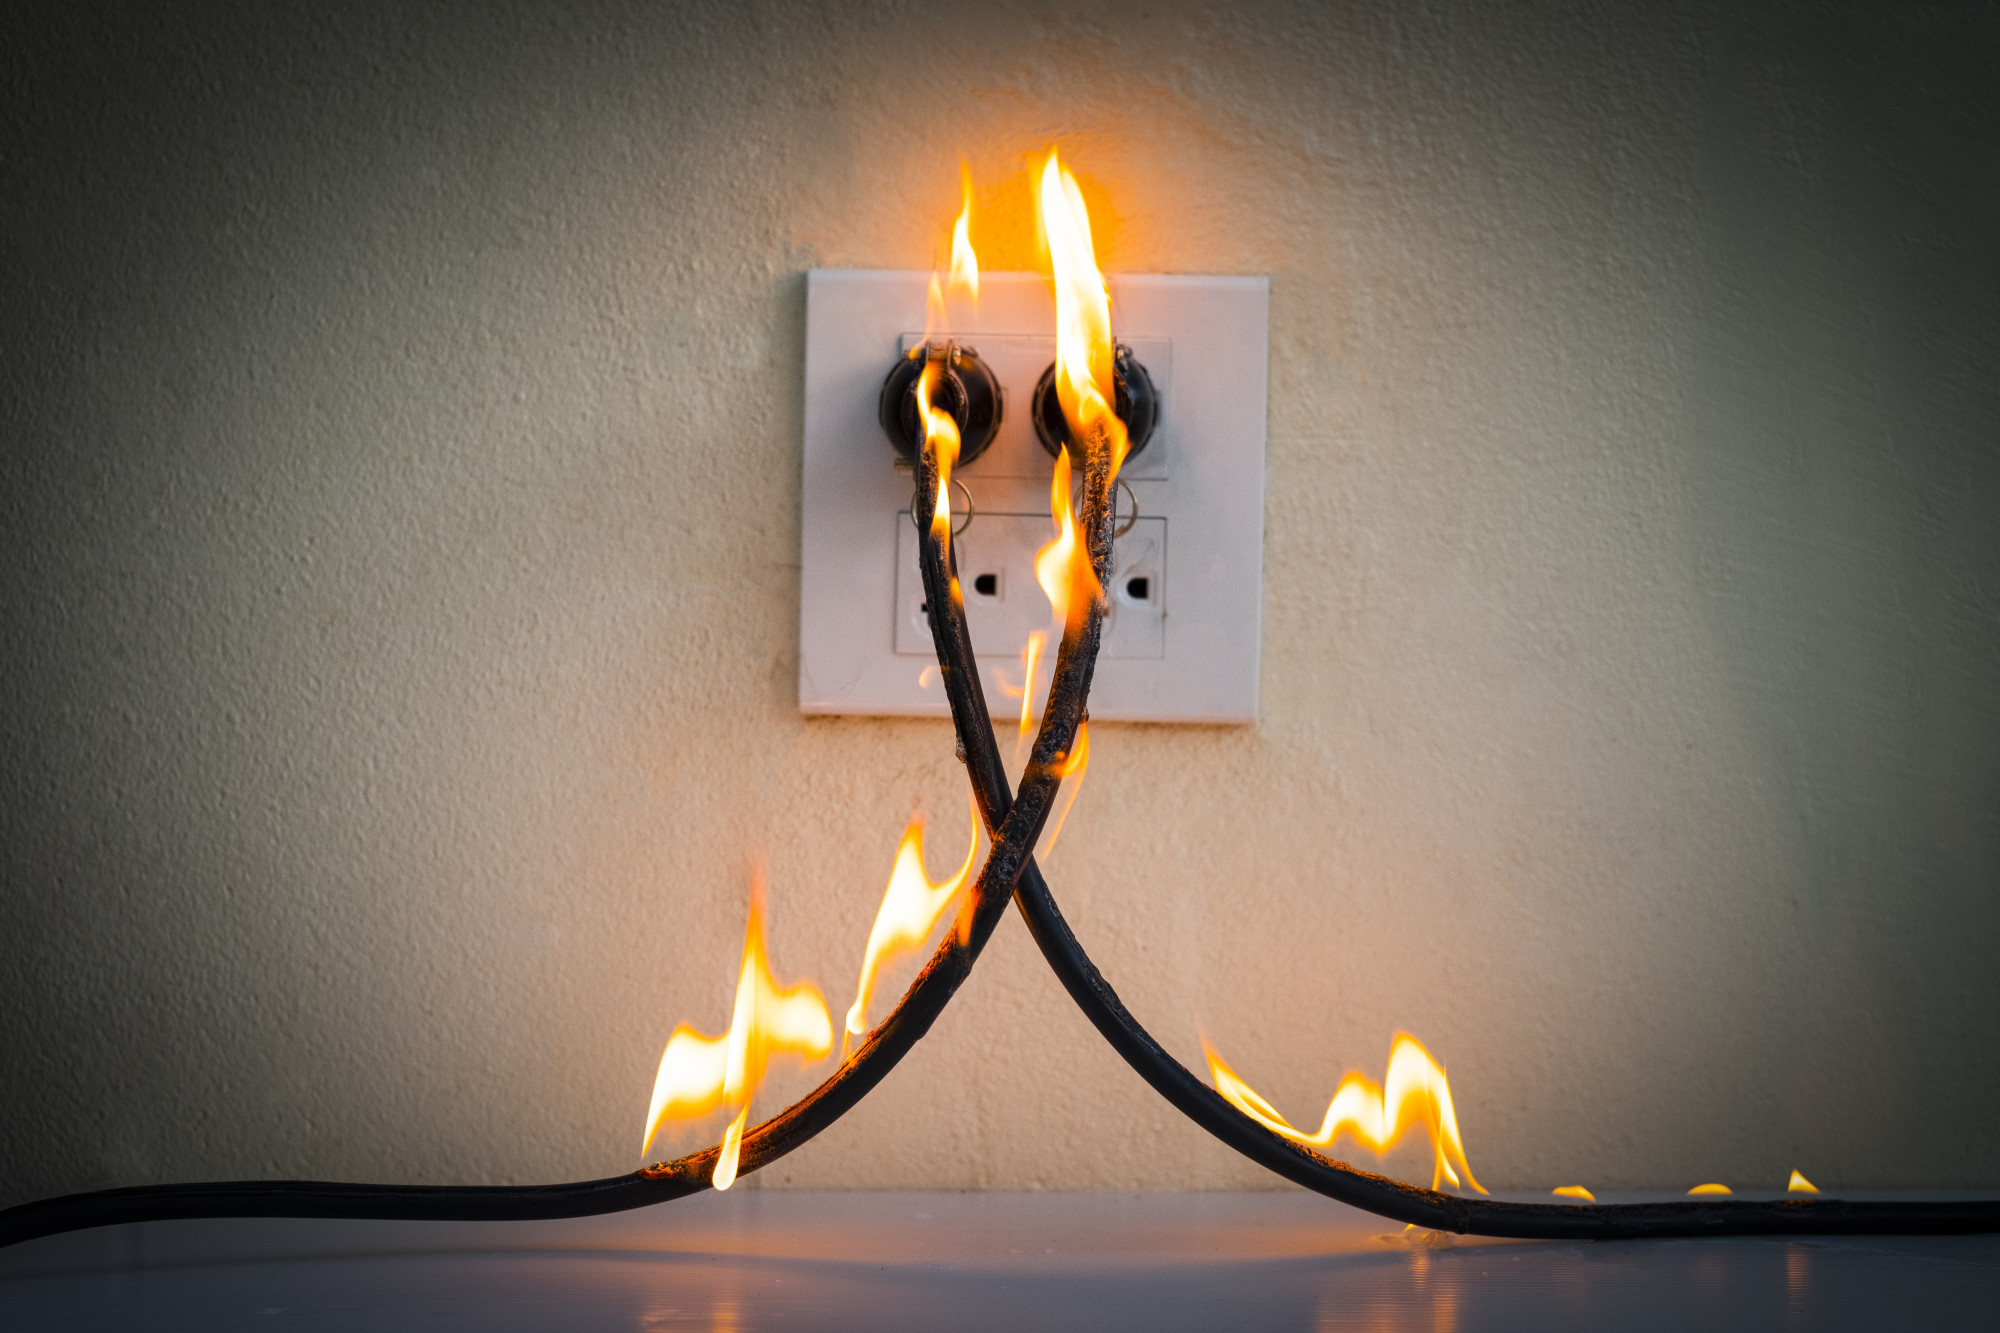 3 Ways a Power Surge Affects the Home